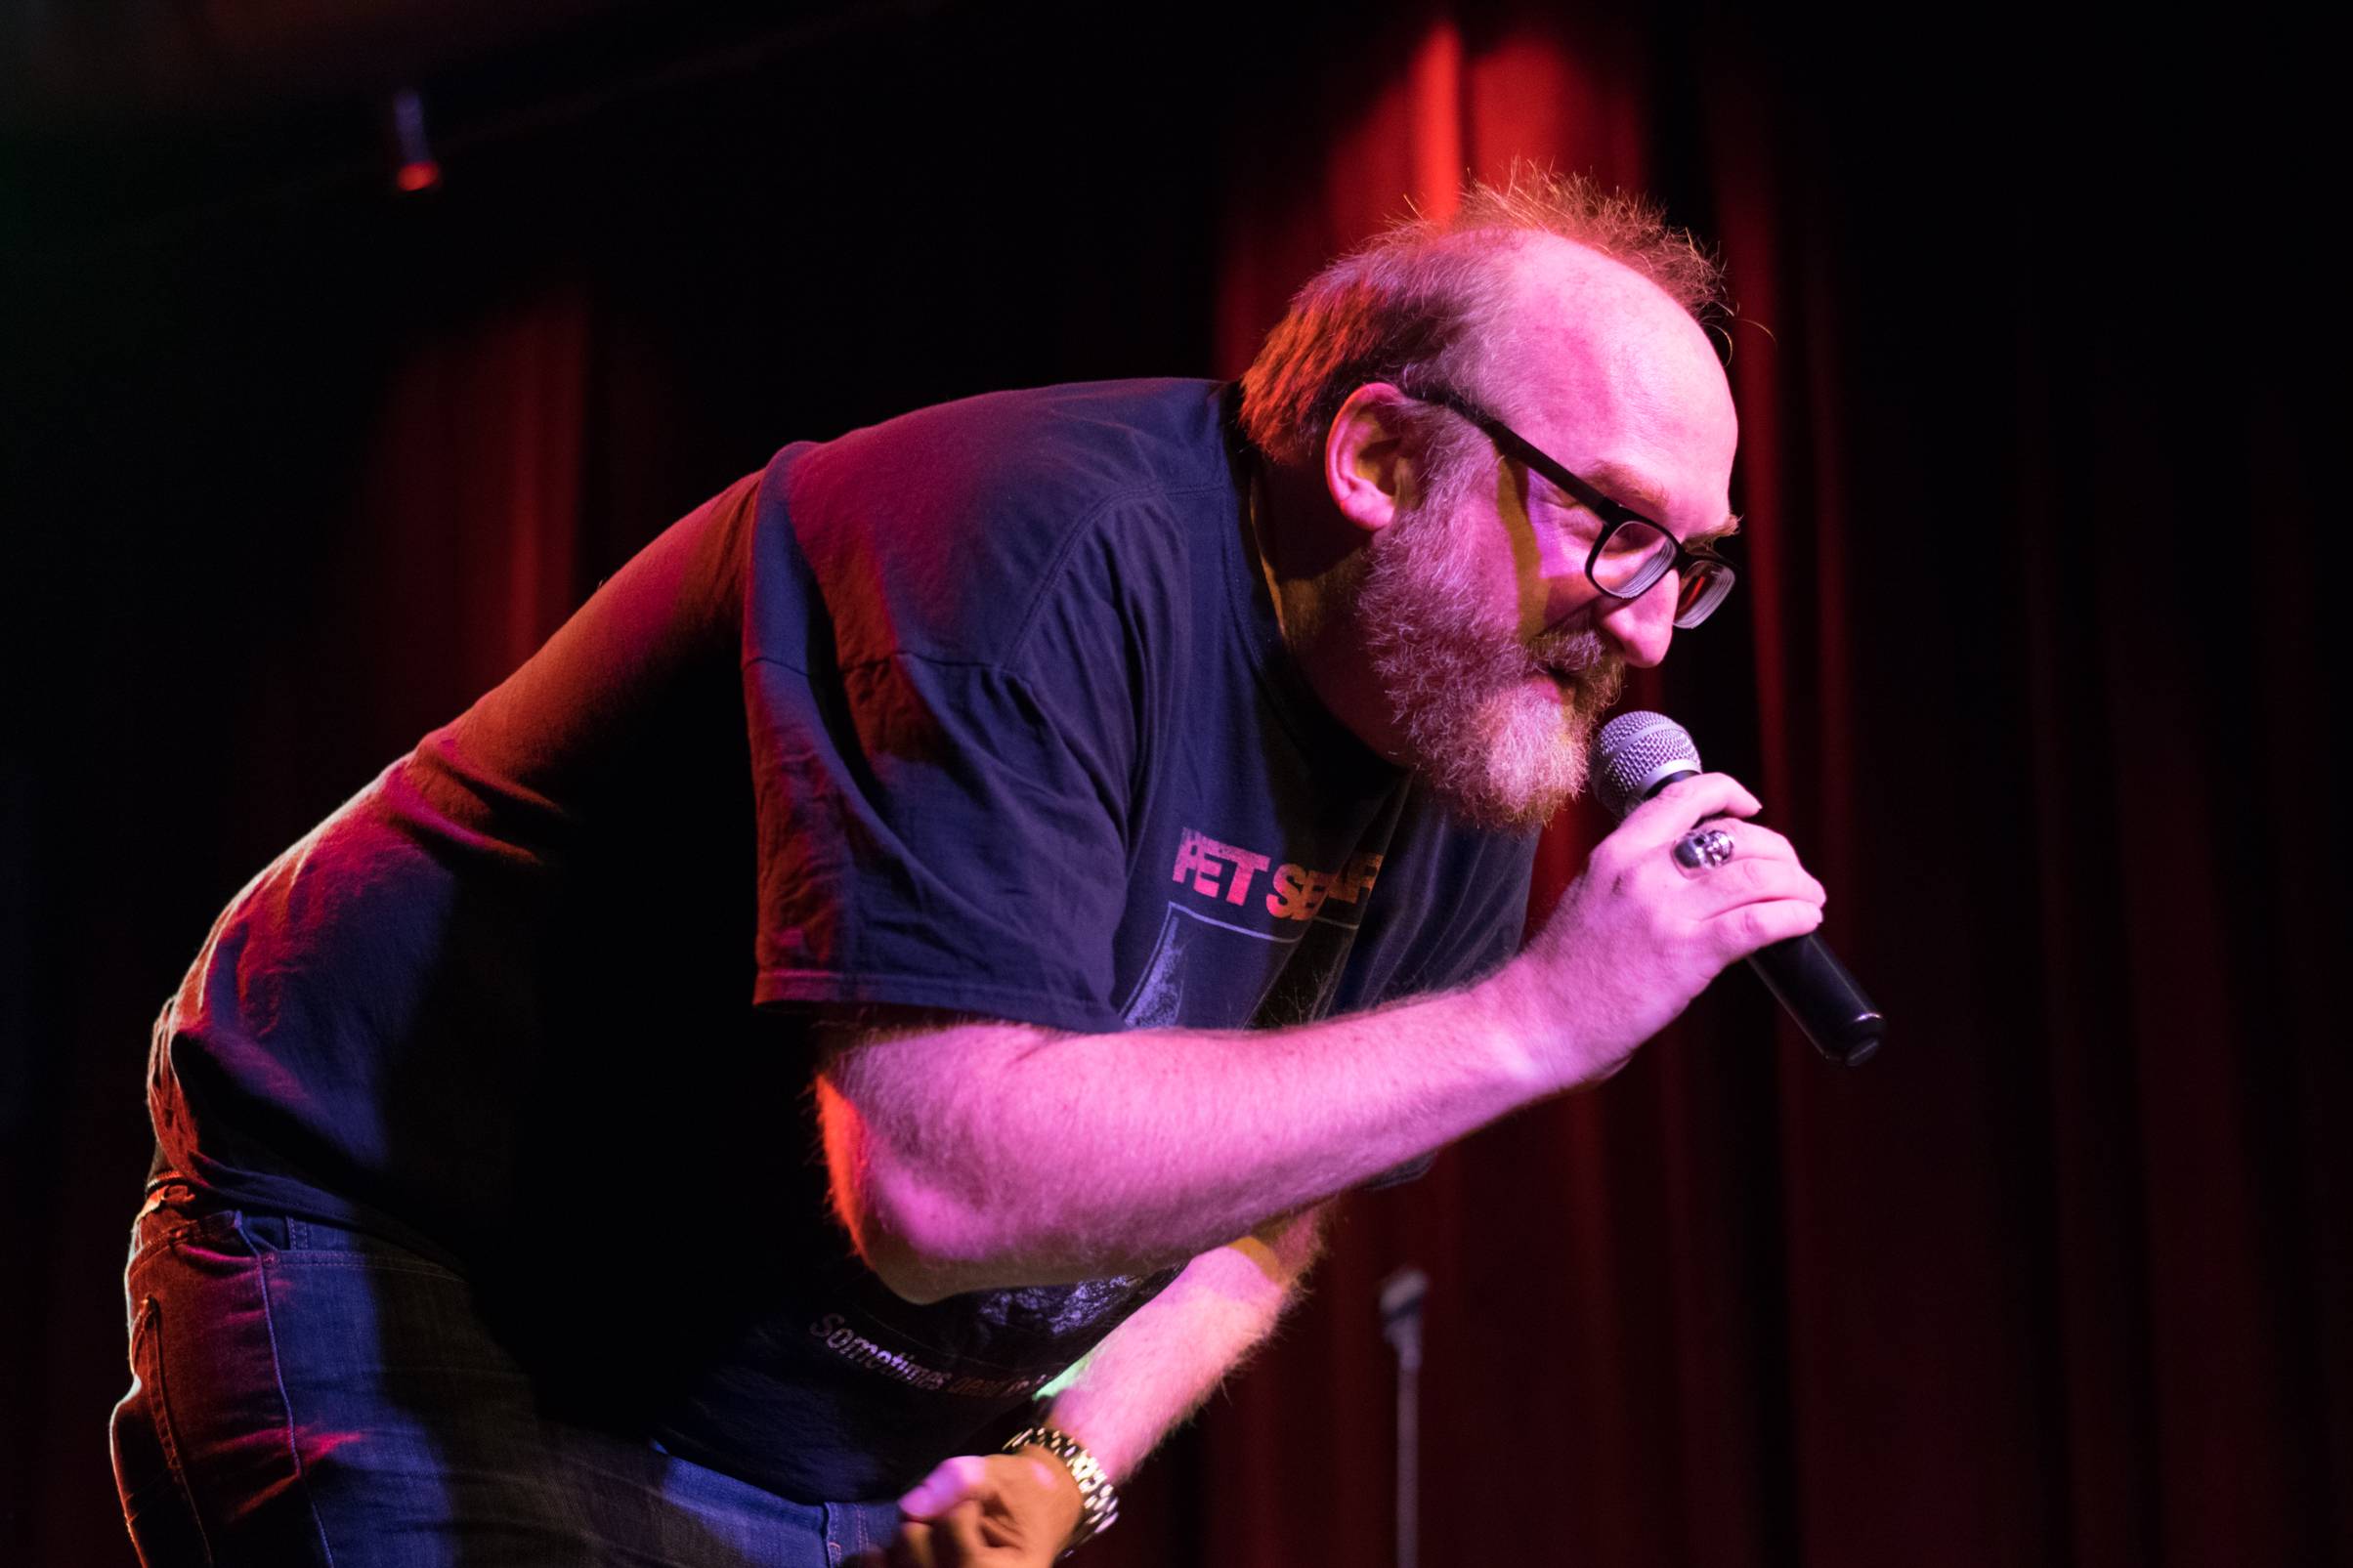 An evening with Brian Posehn